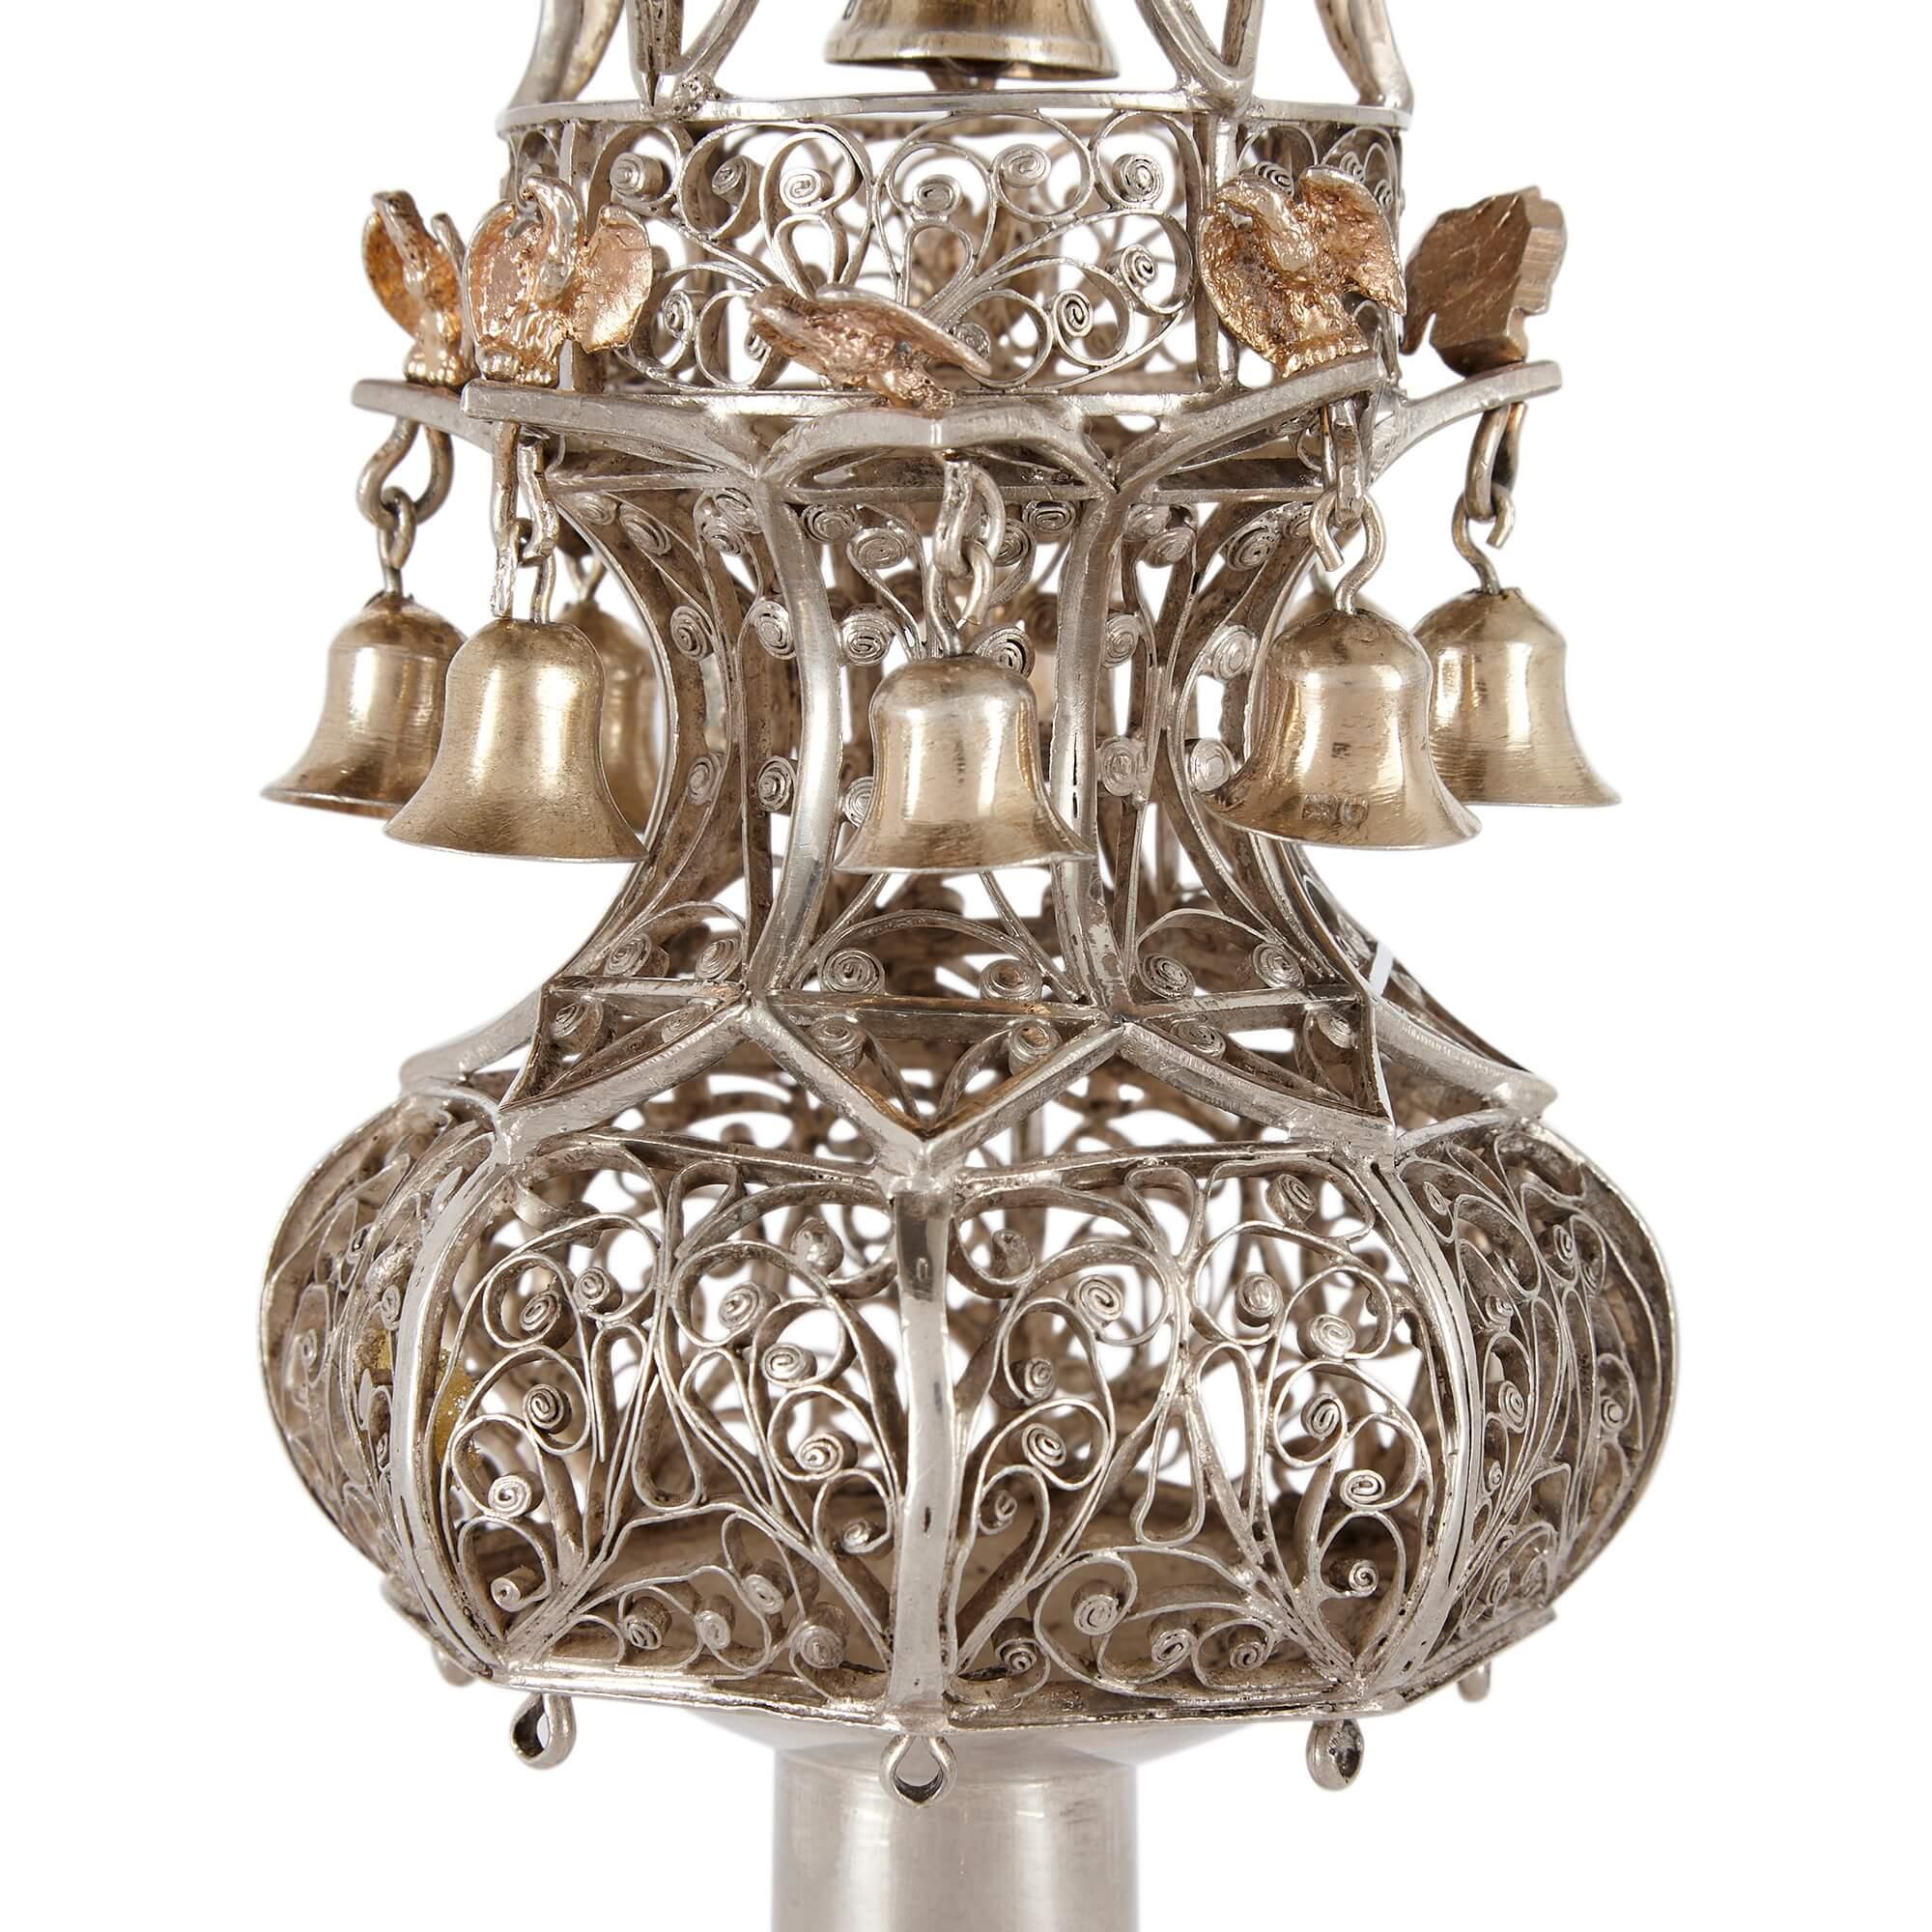 Pair of antique English silver Judaica Rimonim or Torah Finials.
London, 1916
Measures : Height 28cm, diameter 9cm

These fine pieces of antique Judaica are a pair of Torah finials, also known as Rimonim, and were made in England in the early